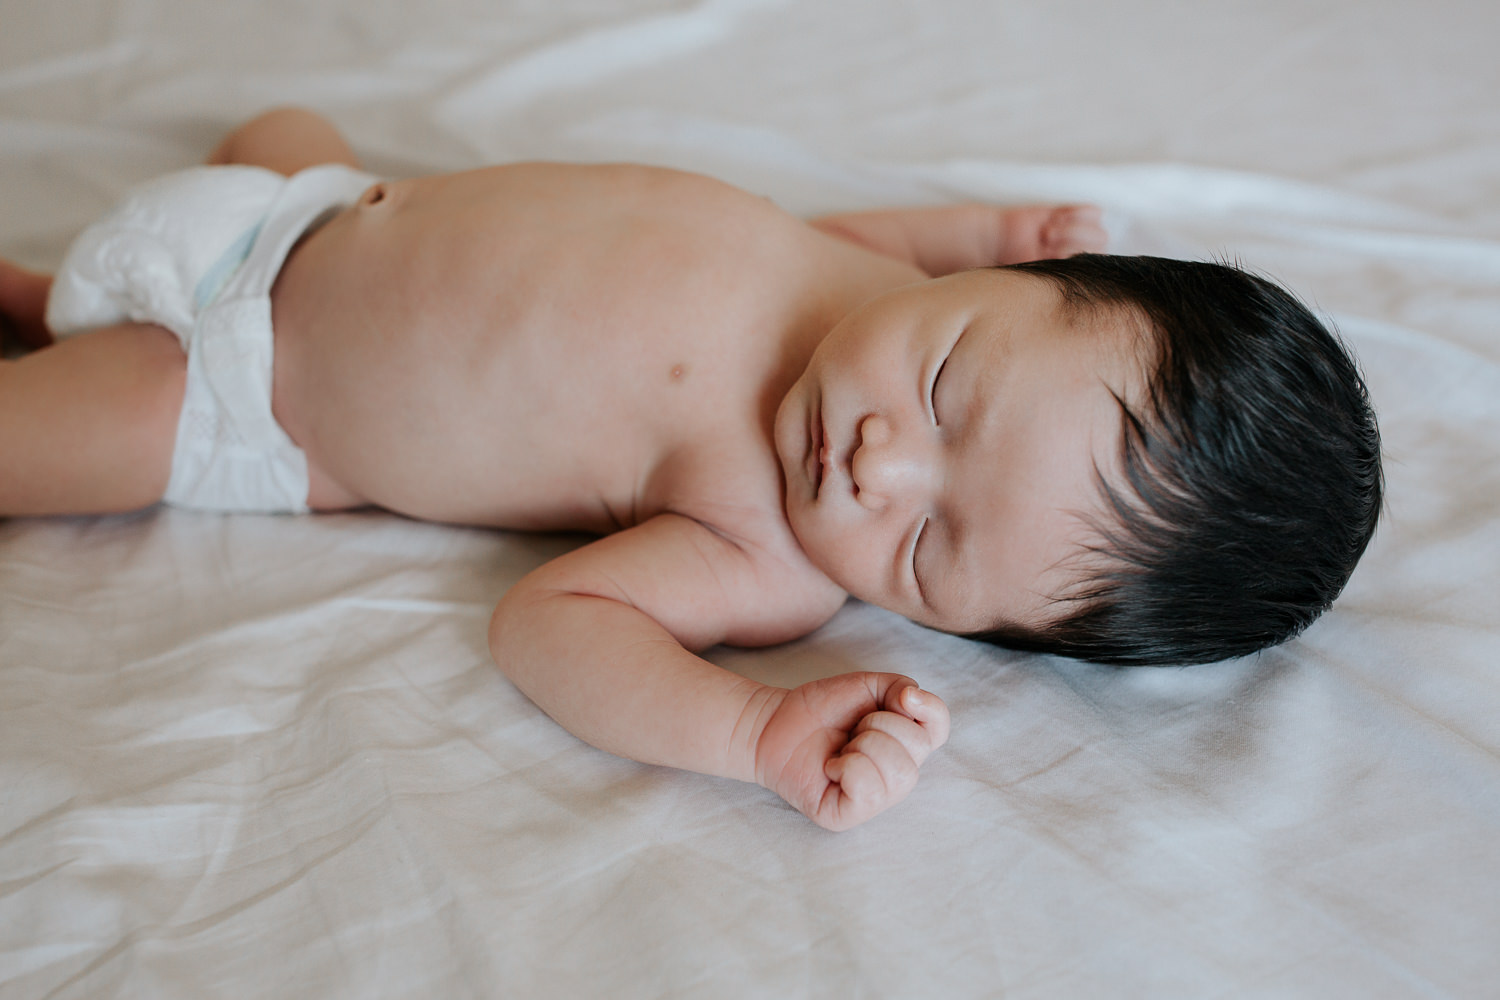 2 week old baby boy with long dark hair in diaper lying on bed, body covered by white swaddle, arms out, head to side, sleeping on bed - Markham Lifestyle Photos